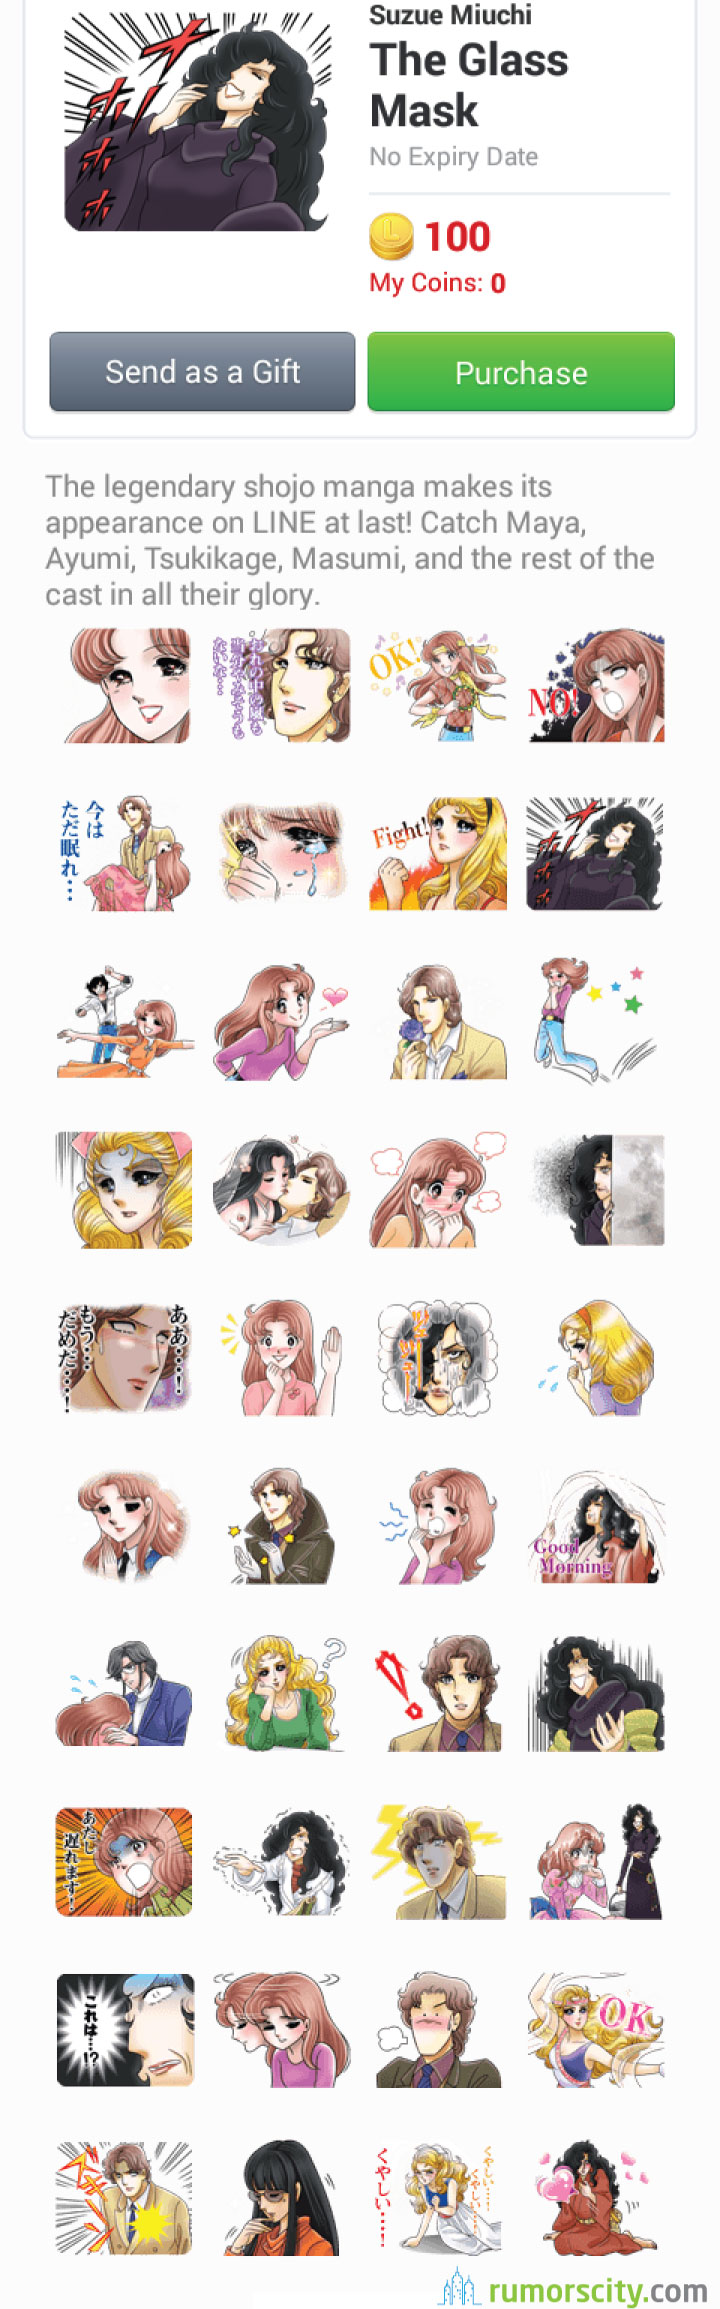 The-Glass-Mask-Line-sticker-in-Thailand-Paid-02